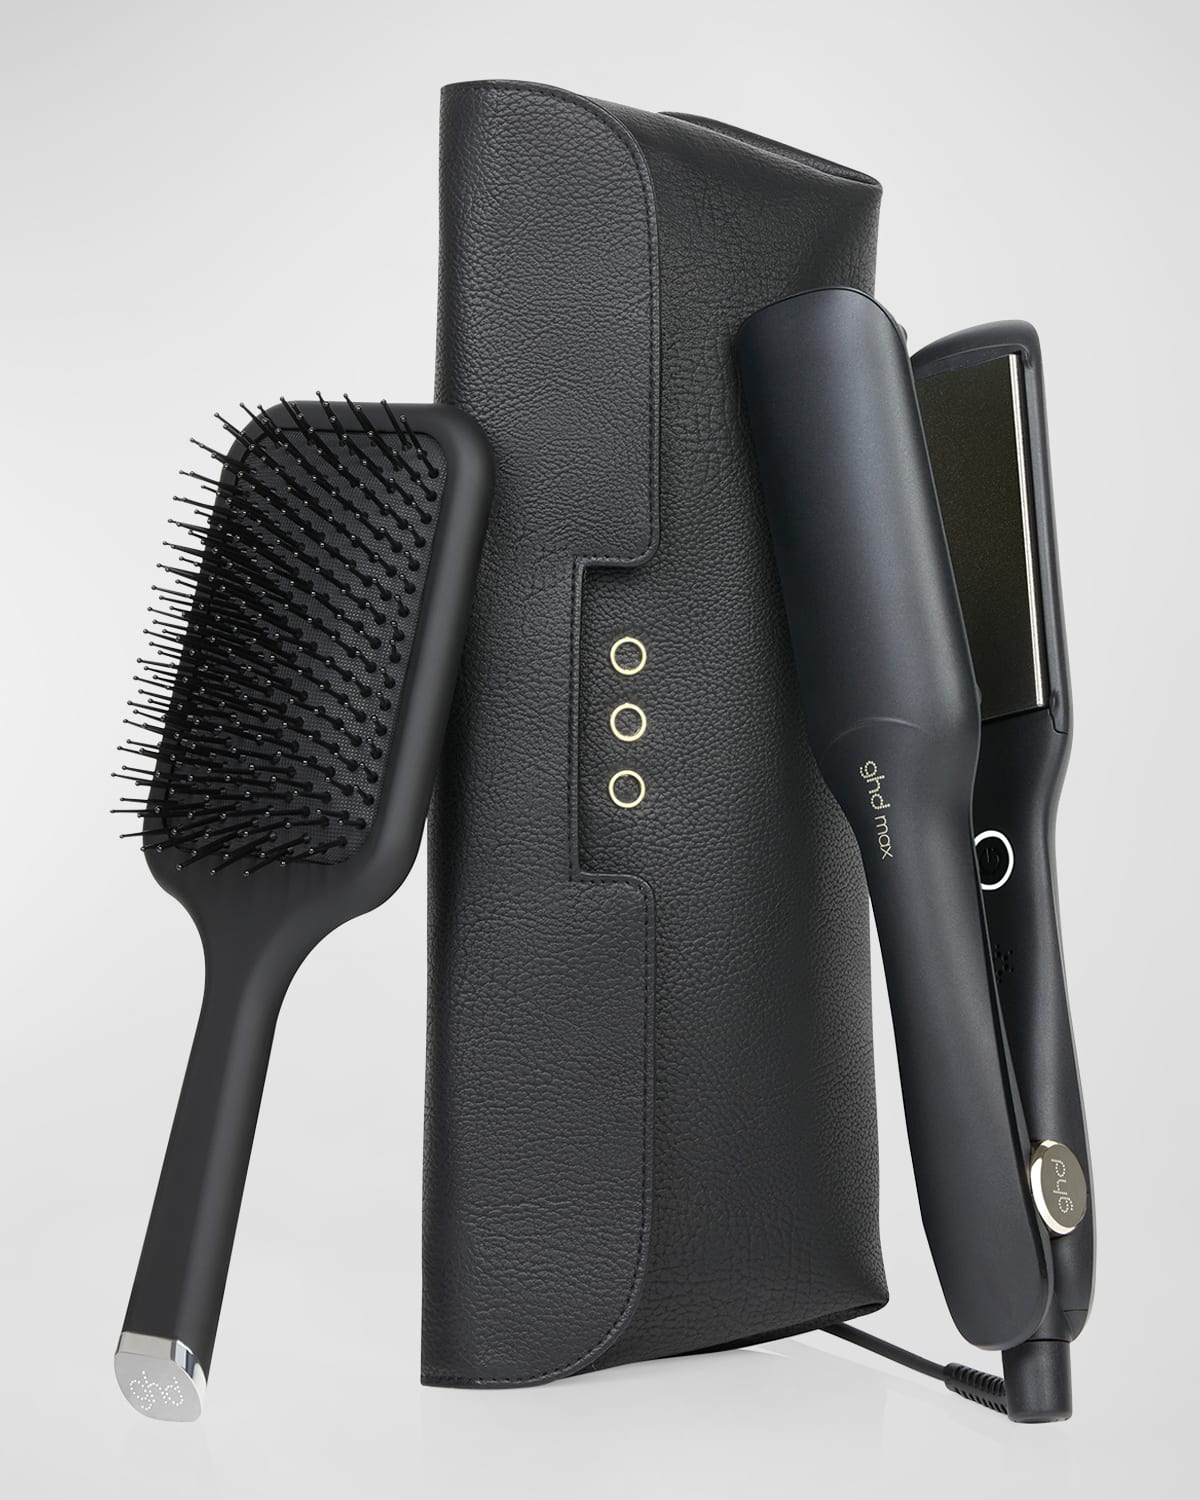 ghd Max Styler 2" Flat Iron Gift Set ($324 Value)